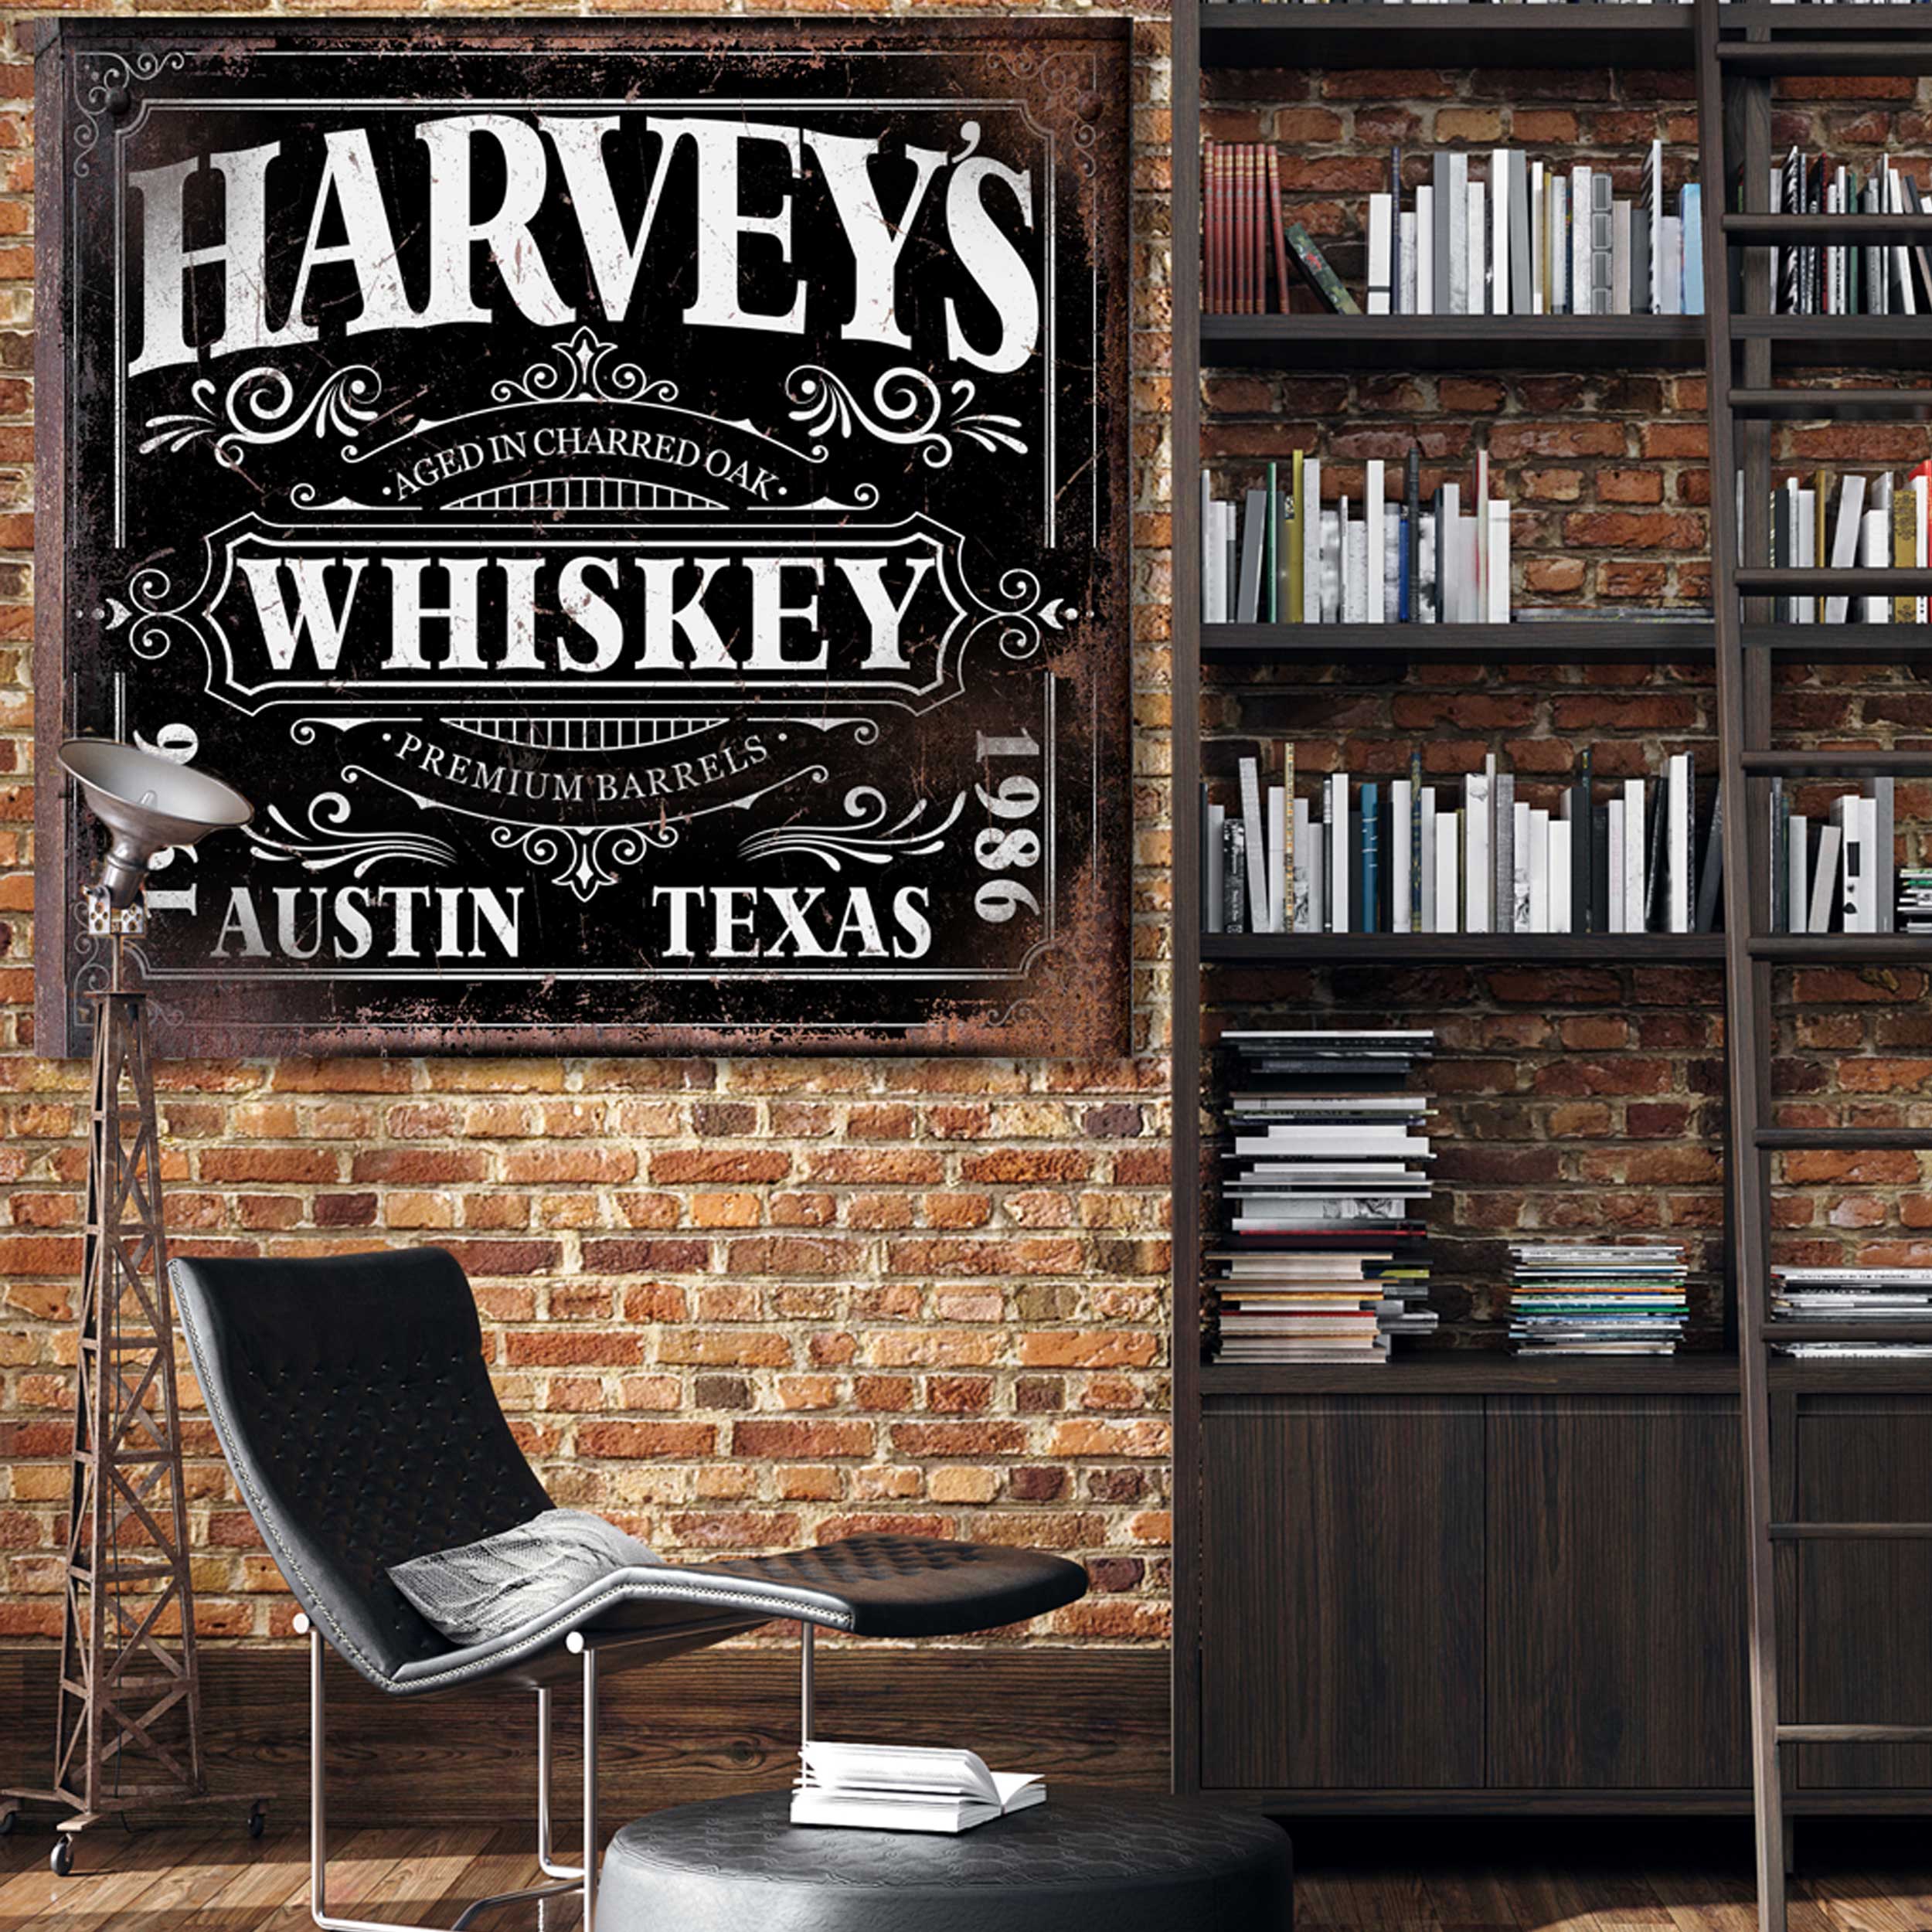 Top Shelf Whiskey Bar Signs made on black distressed background with words on it [Personalized Name] Whiskey, aged in charred oak premium barrels, City & State with established date on the side with a very industrial decor style.